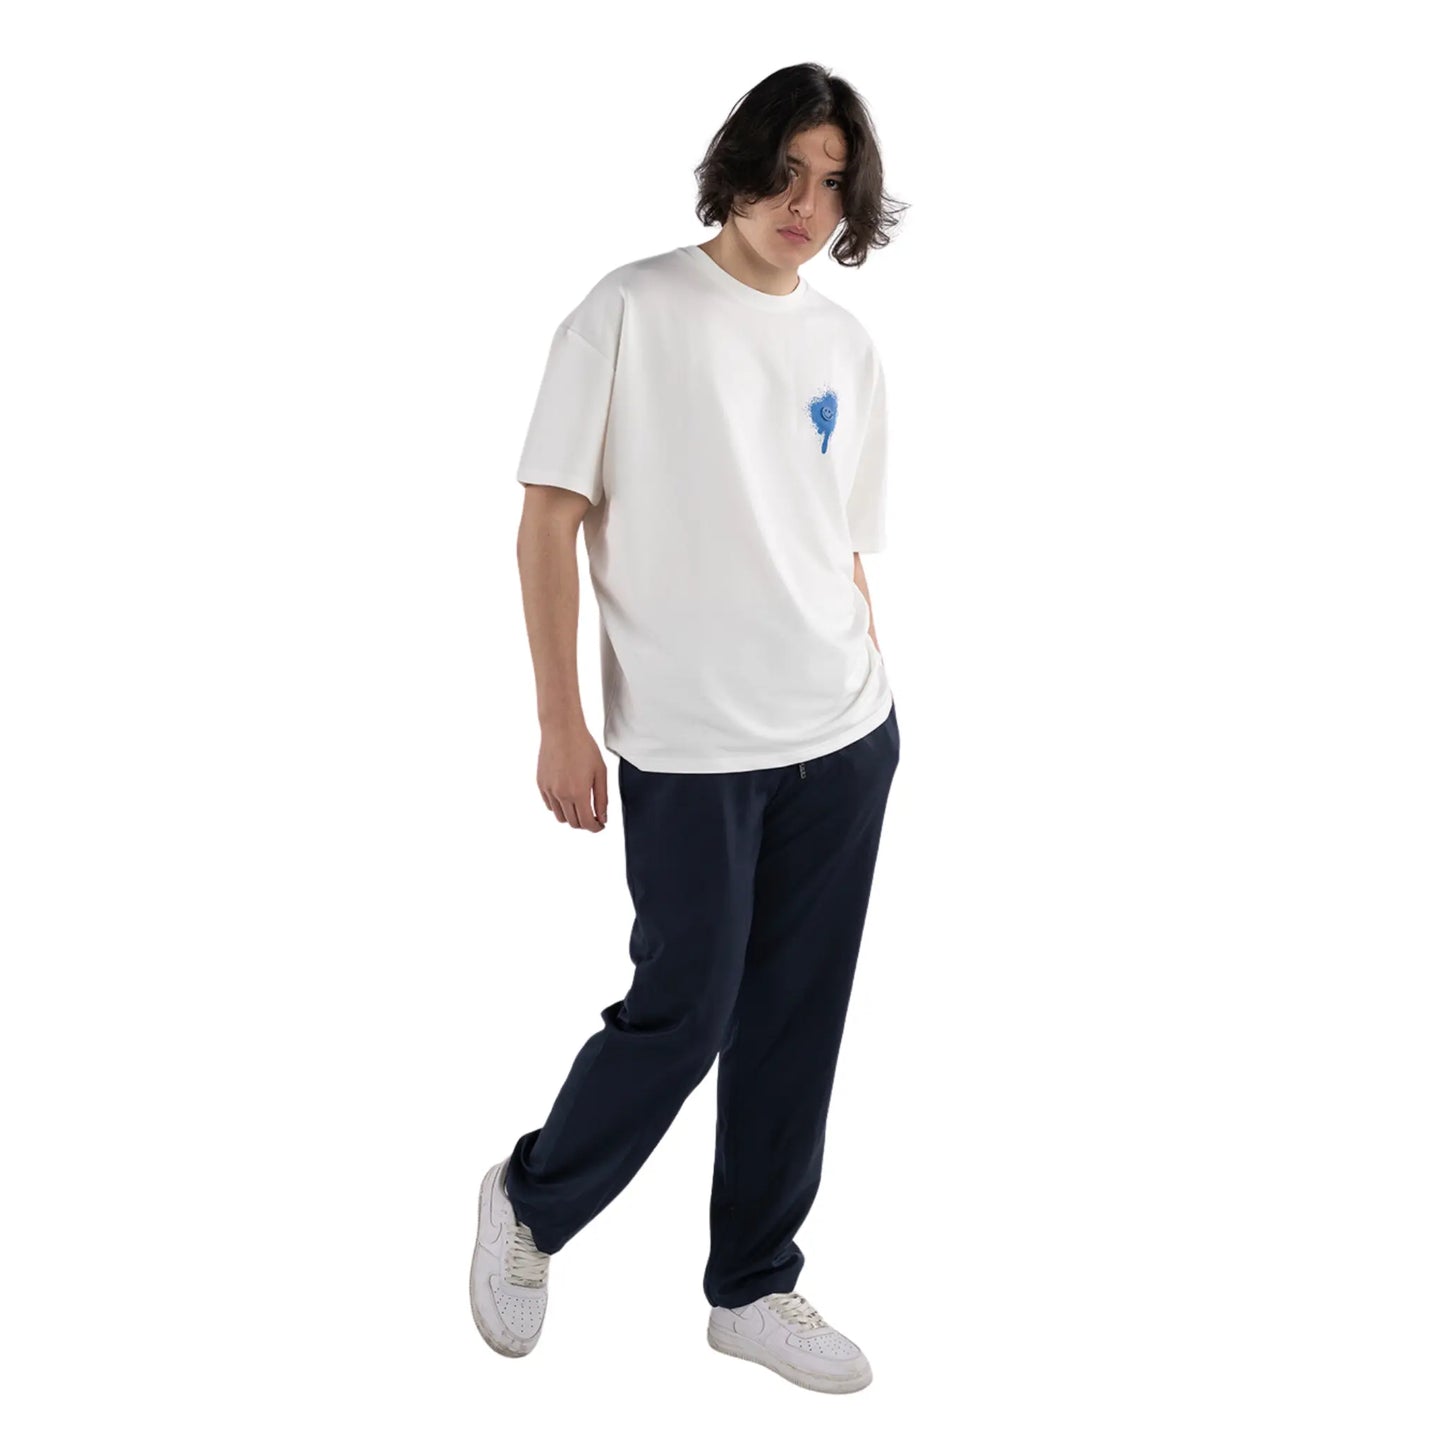 Oversized T-Shirt White with Blue Painted Smiley and Graffiti worn by man front view